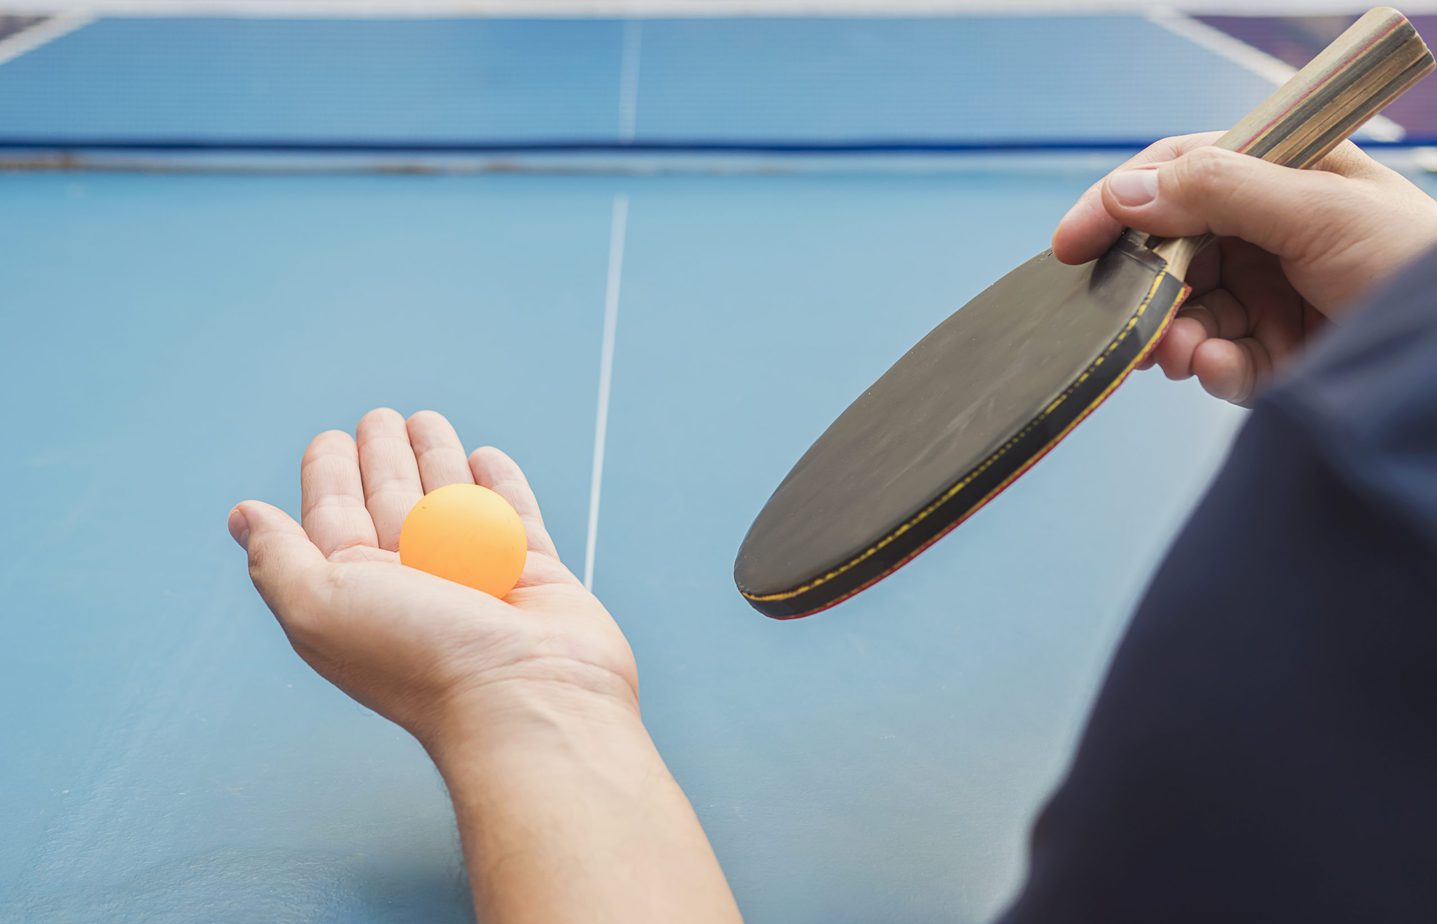 Playing styles in table tennis